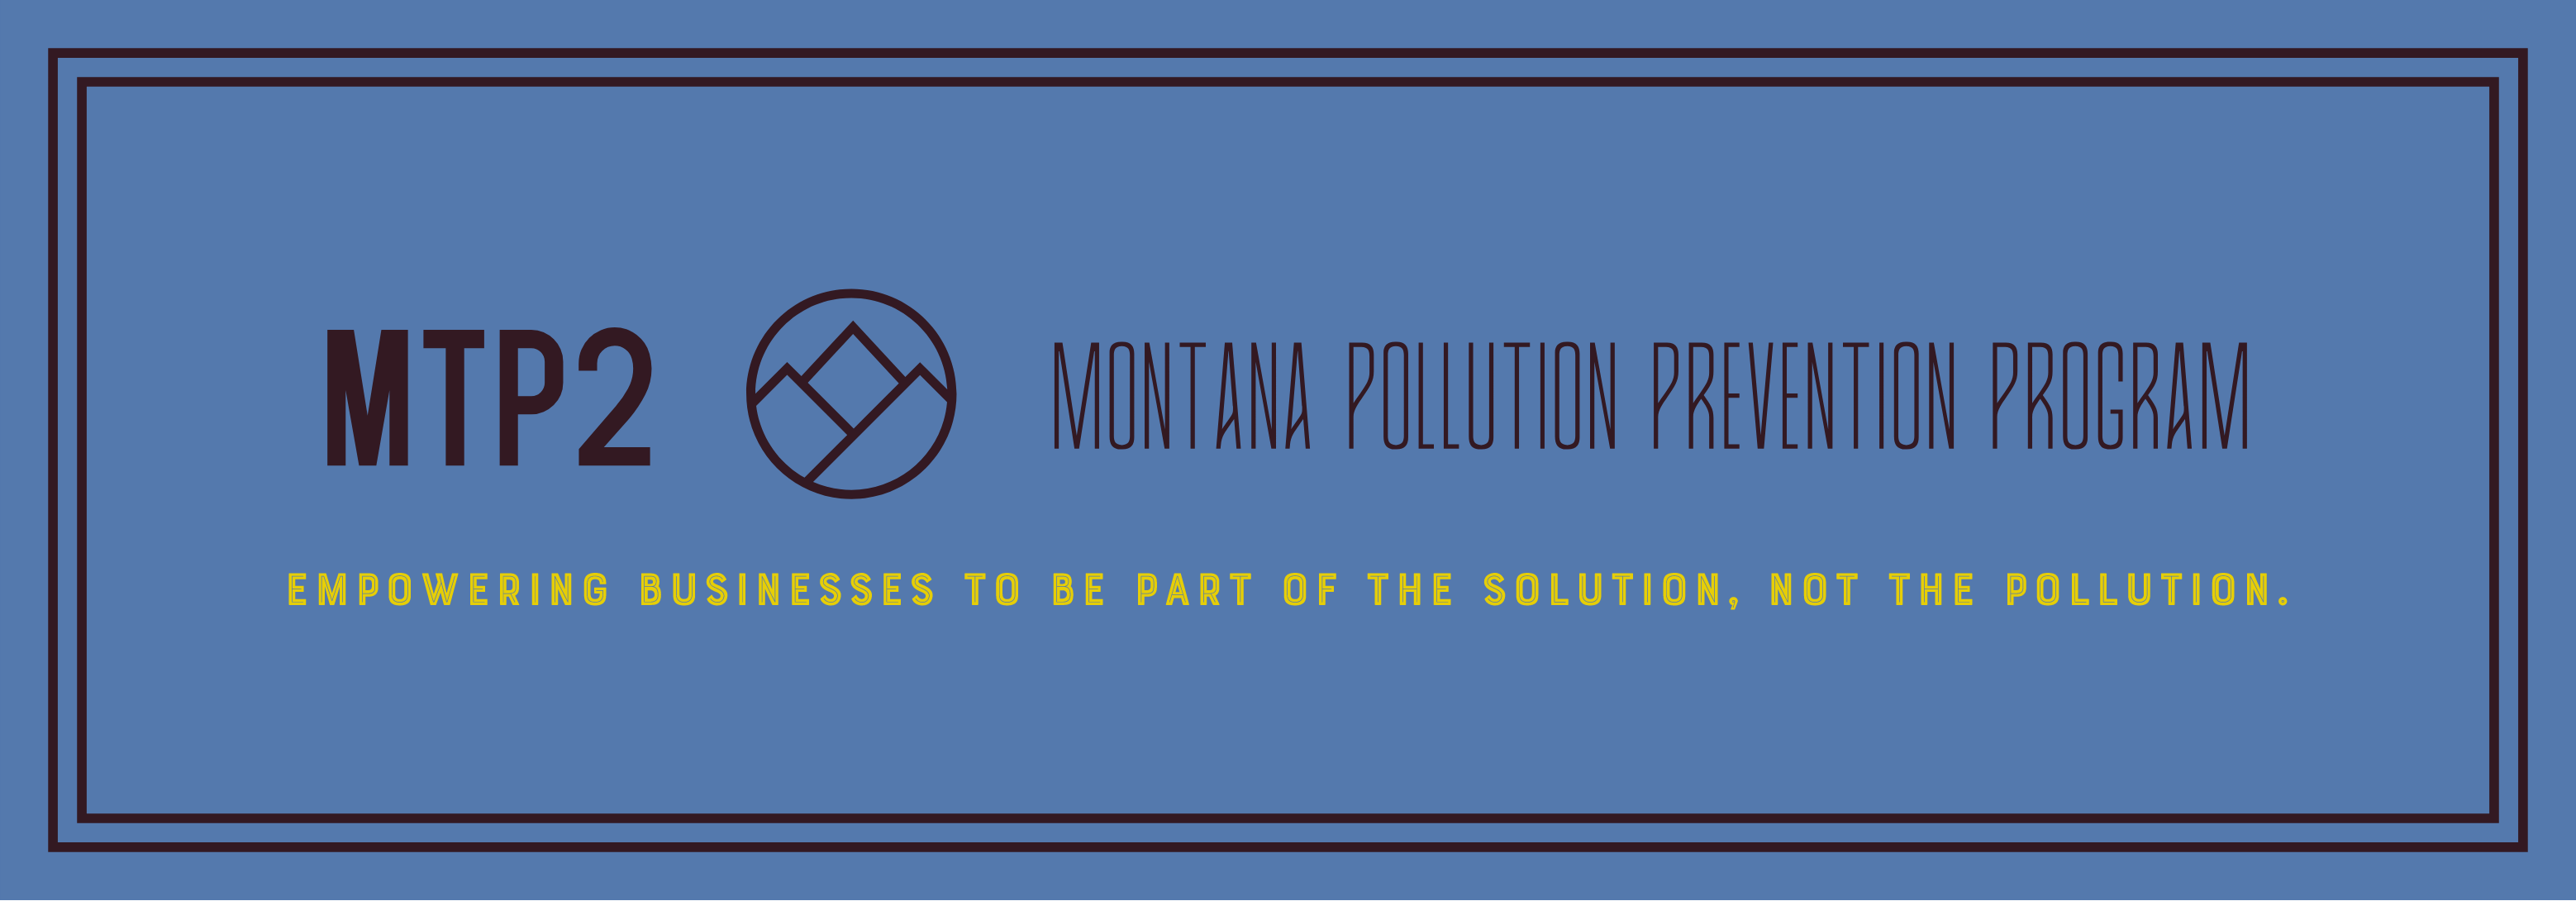 MTP2 - Montana Pollution Prevention “Empowering businesses to be part of the solution, not the pollution.”